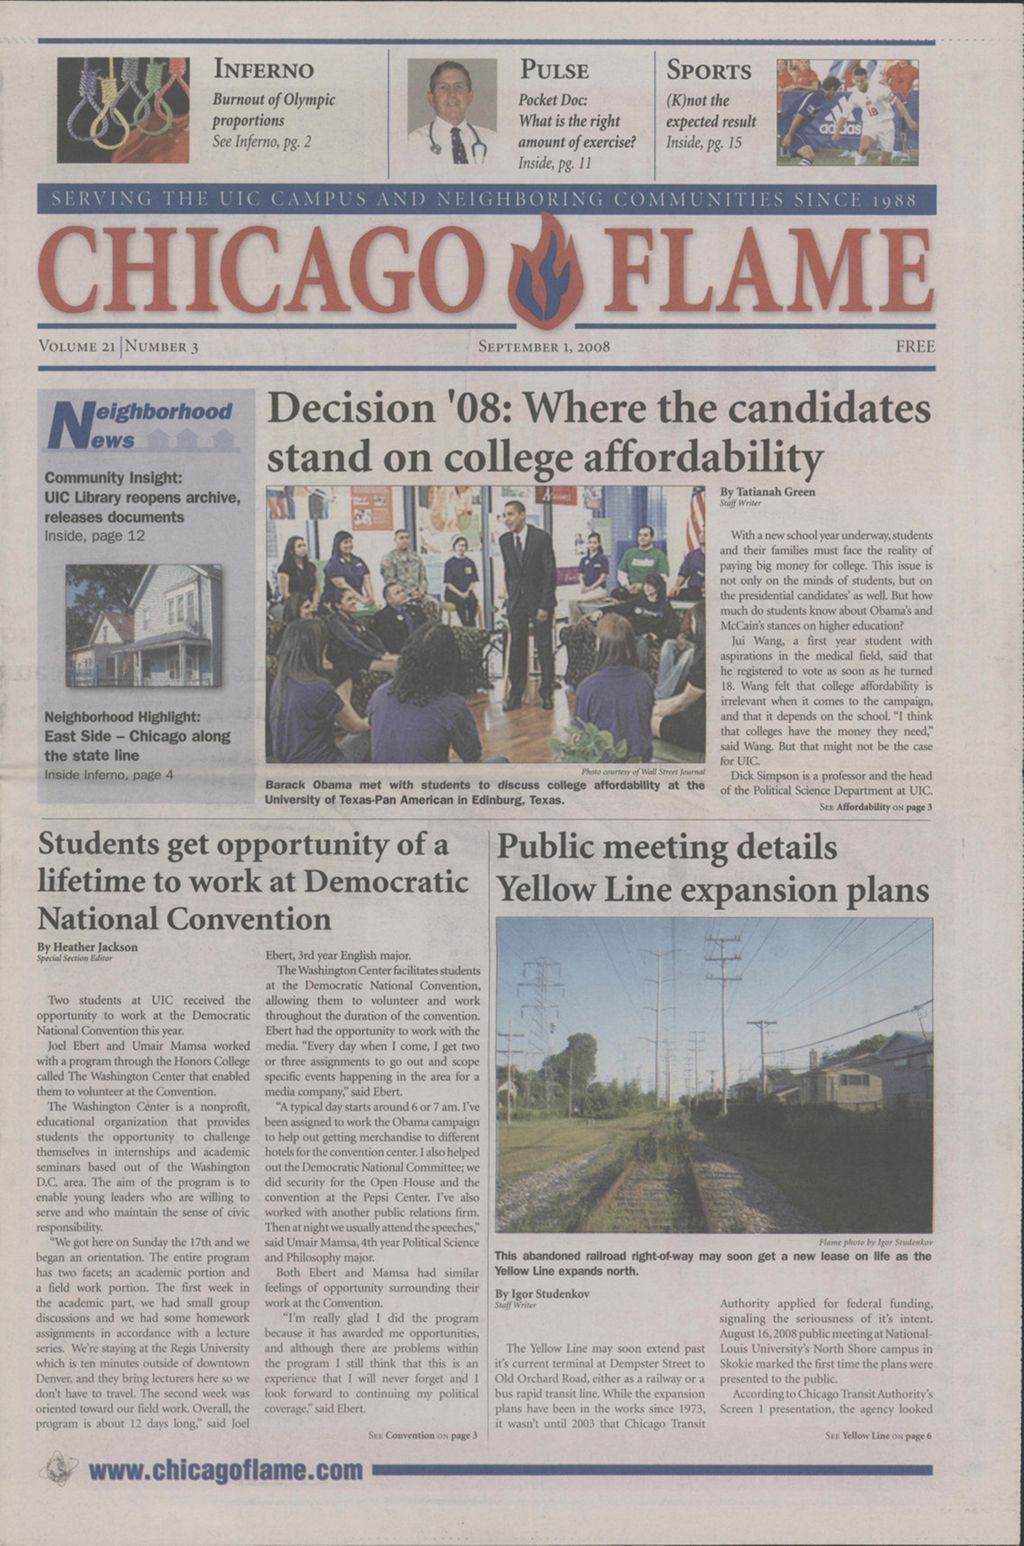 Miniature of Chicago Flame (September 1, 2008)